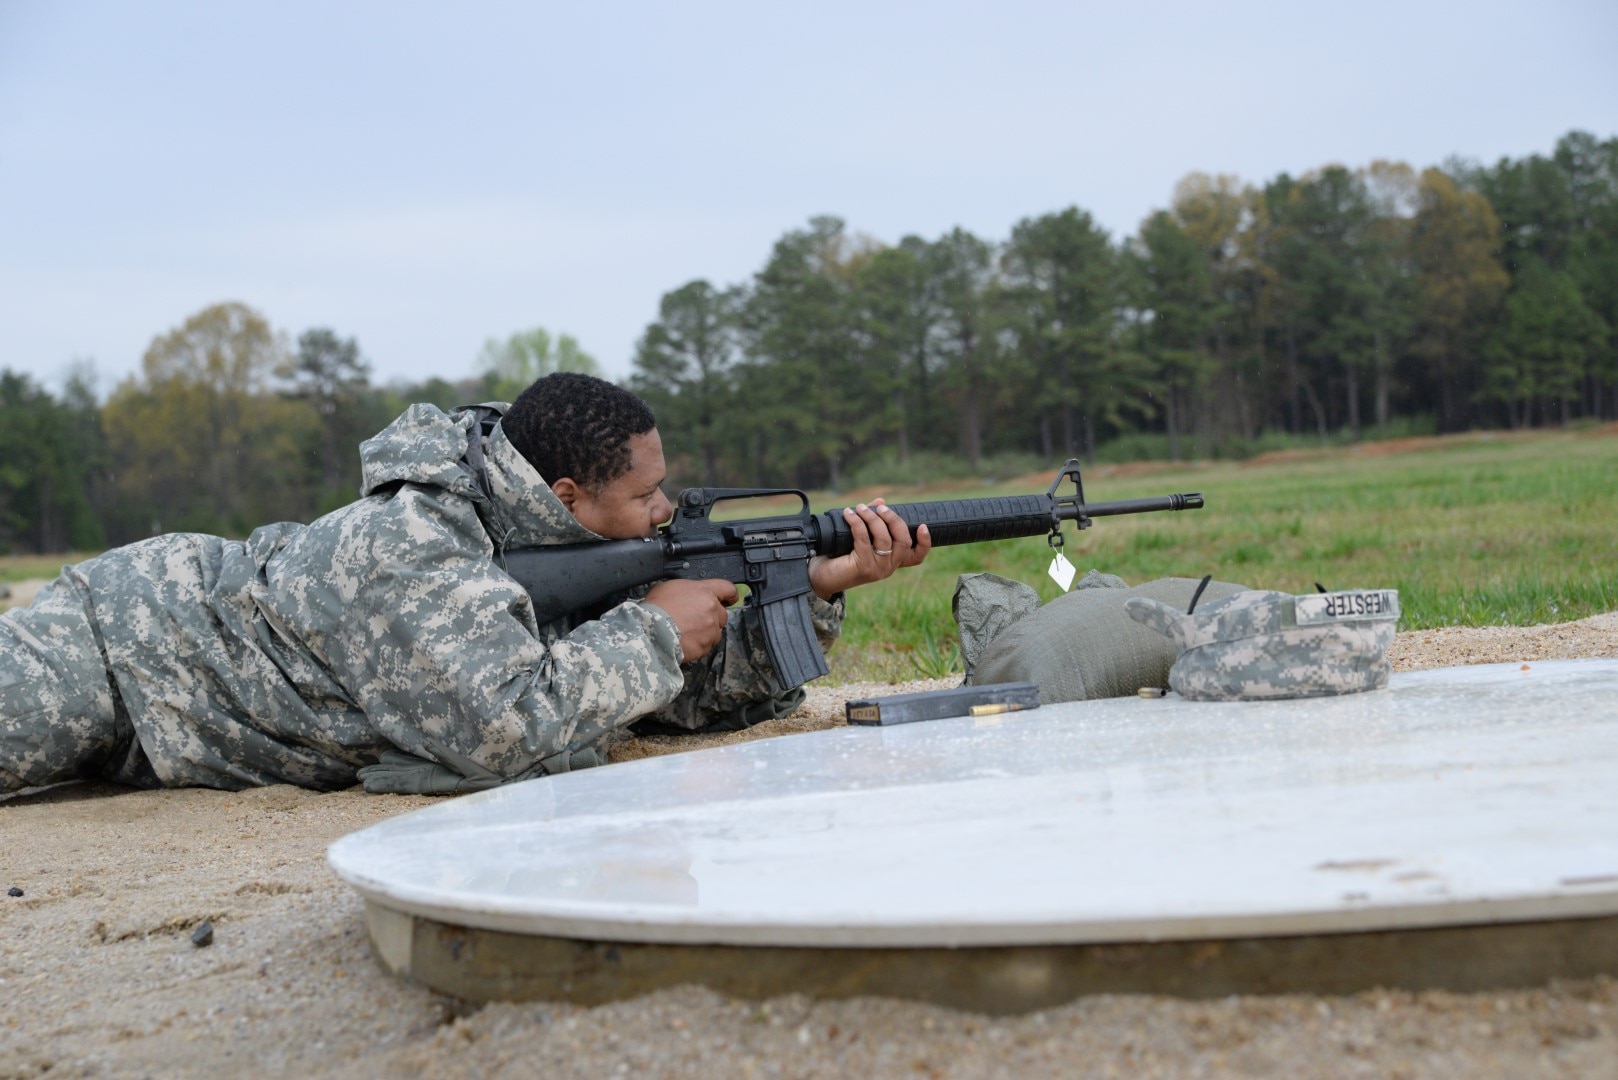 Capt. Rowan Webster, DLA Joint Contingency Acquisition Support Office, fires an M16 Rifle during weapons training April 2 at Fort A.P. Hill, Va.